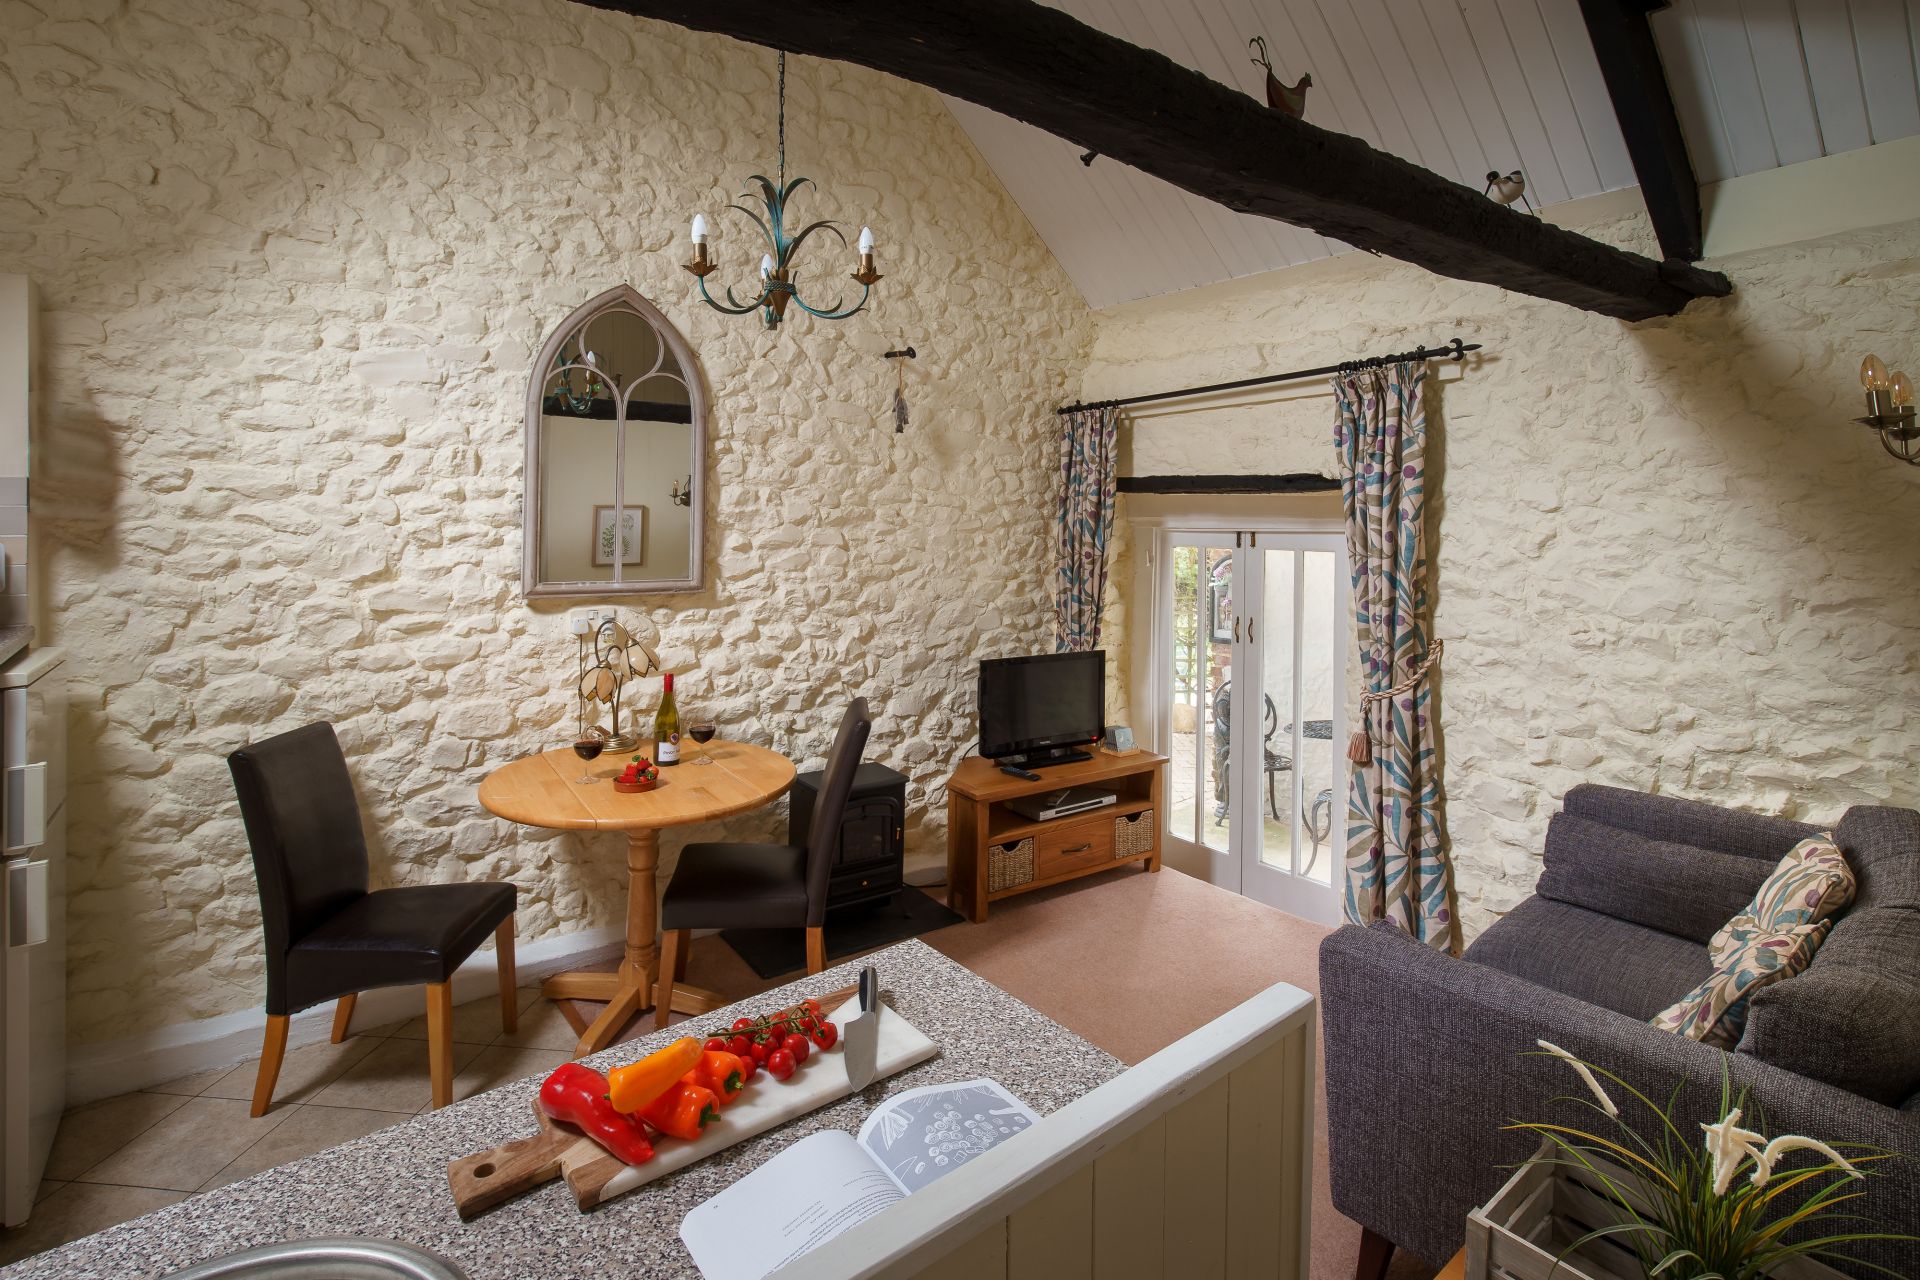 Swallow Cottage is located in Lyme Regis and surrounding villages